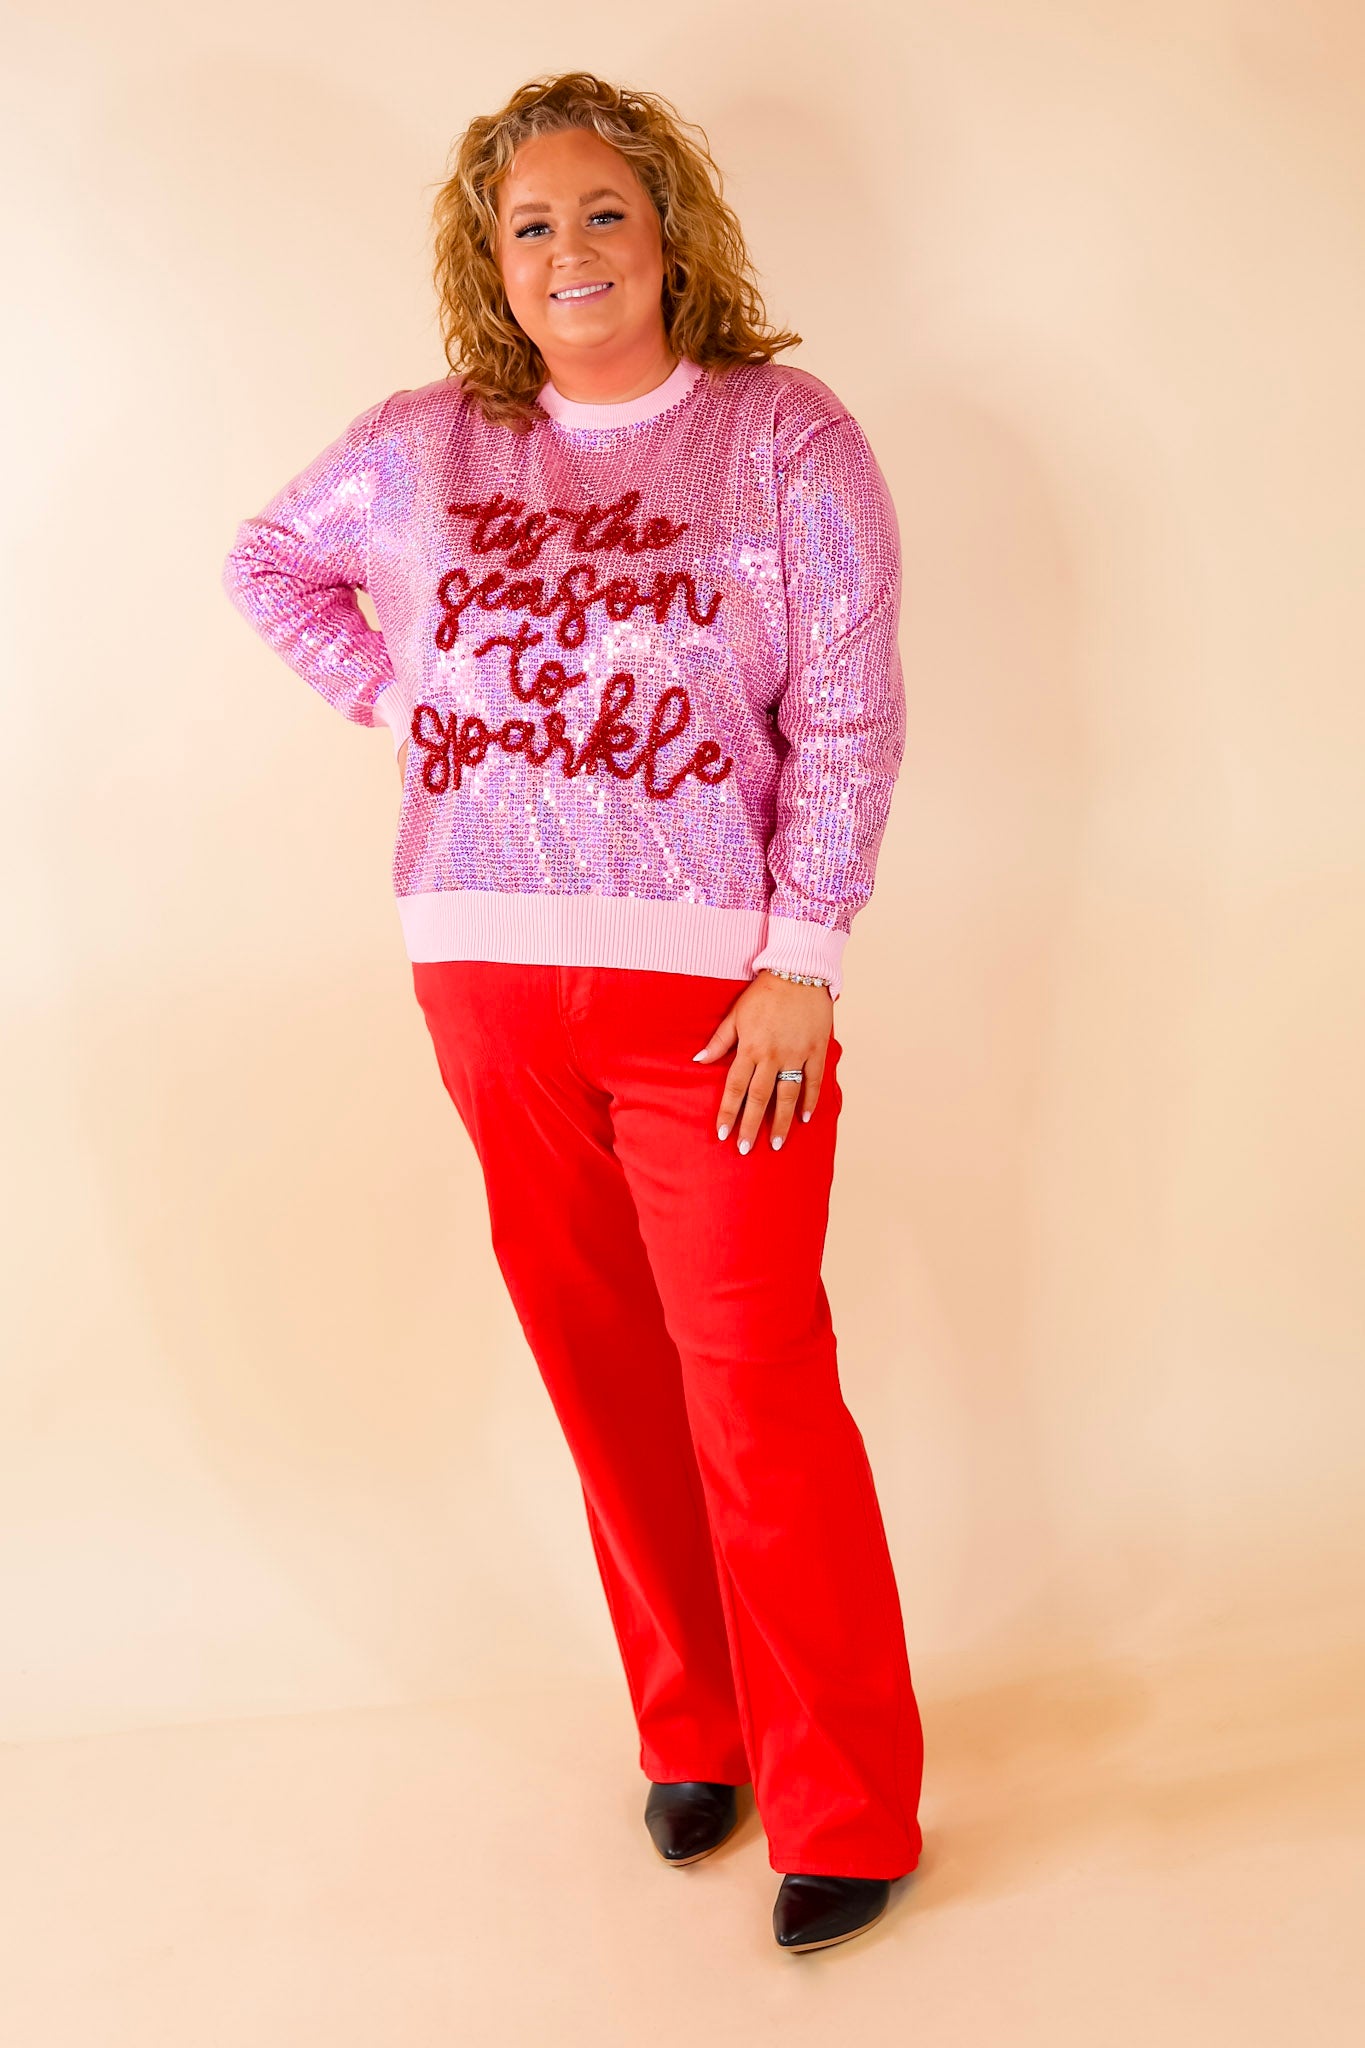 Queen Of Sparkles | 'Tis The Season To Sparkle Sequin Graphic Sweater in Pink - Giddy Up Glamour Boutique